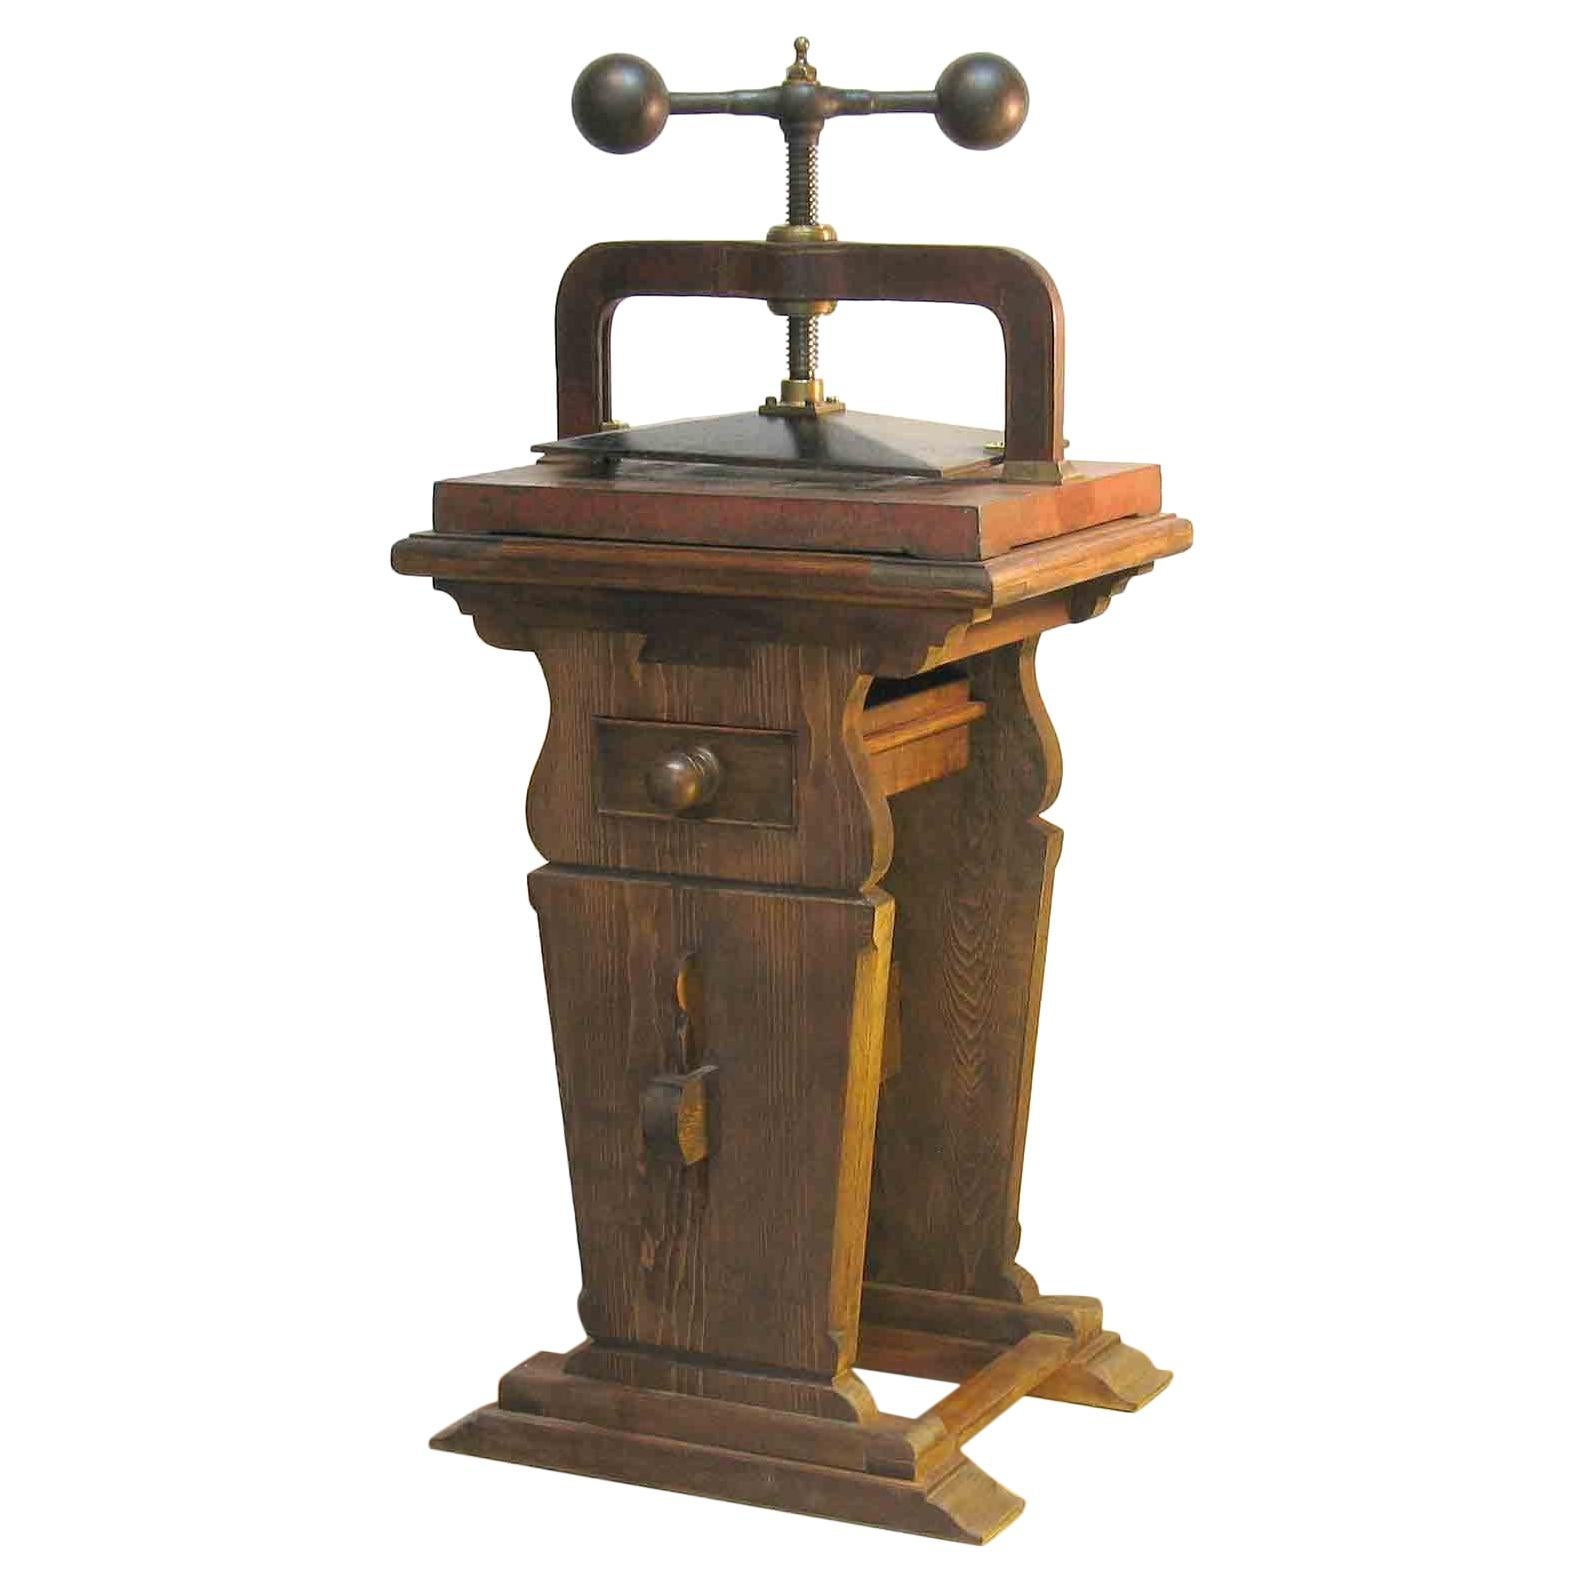 Large Impressive Cast Iron Copying/Book Press on a Trestle Wood Stand circa 1850